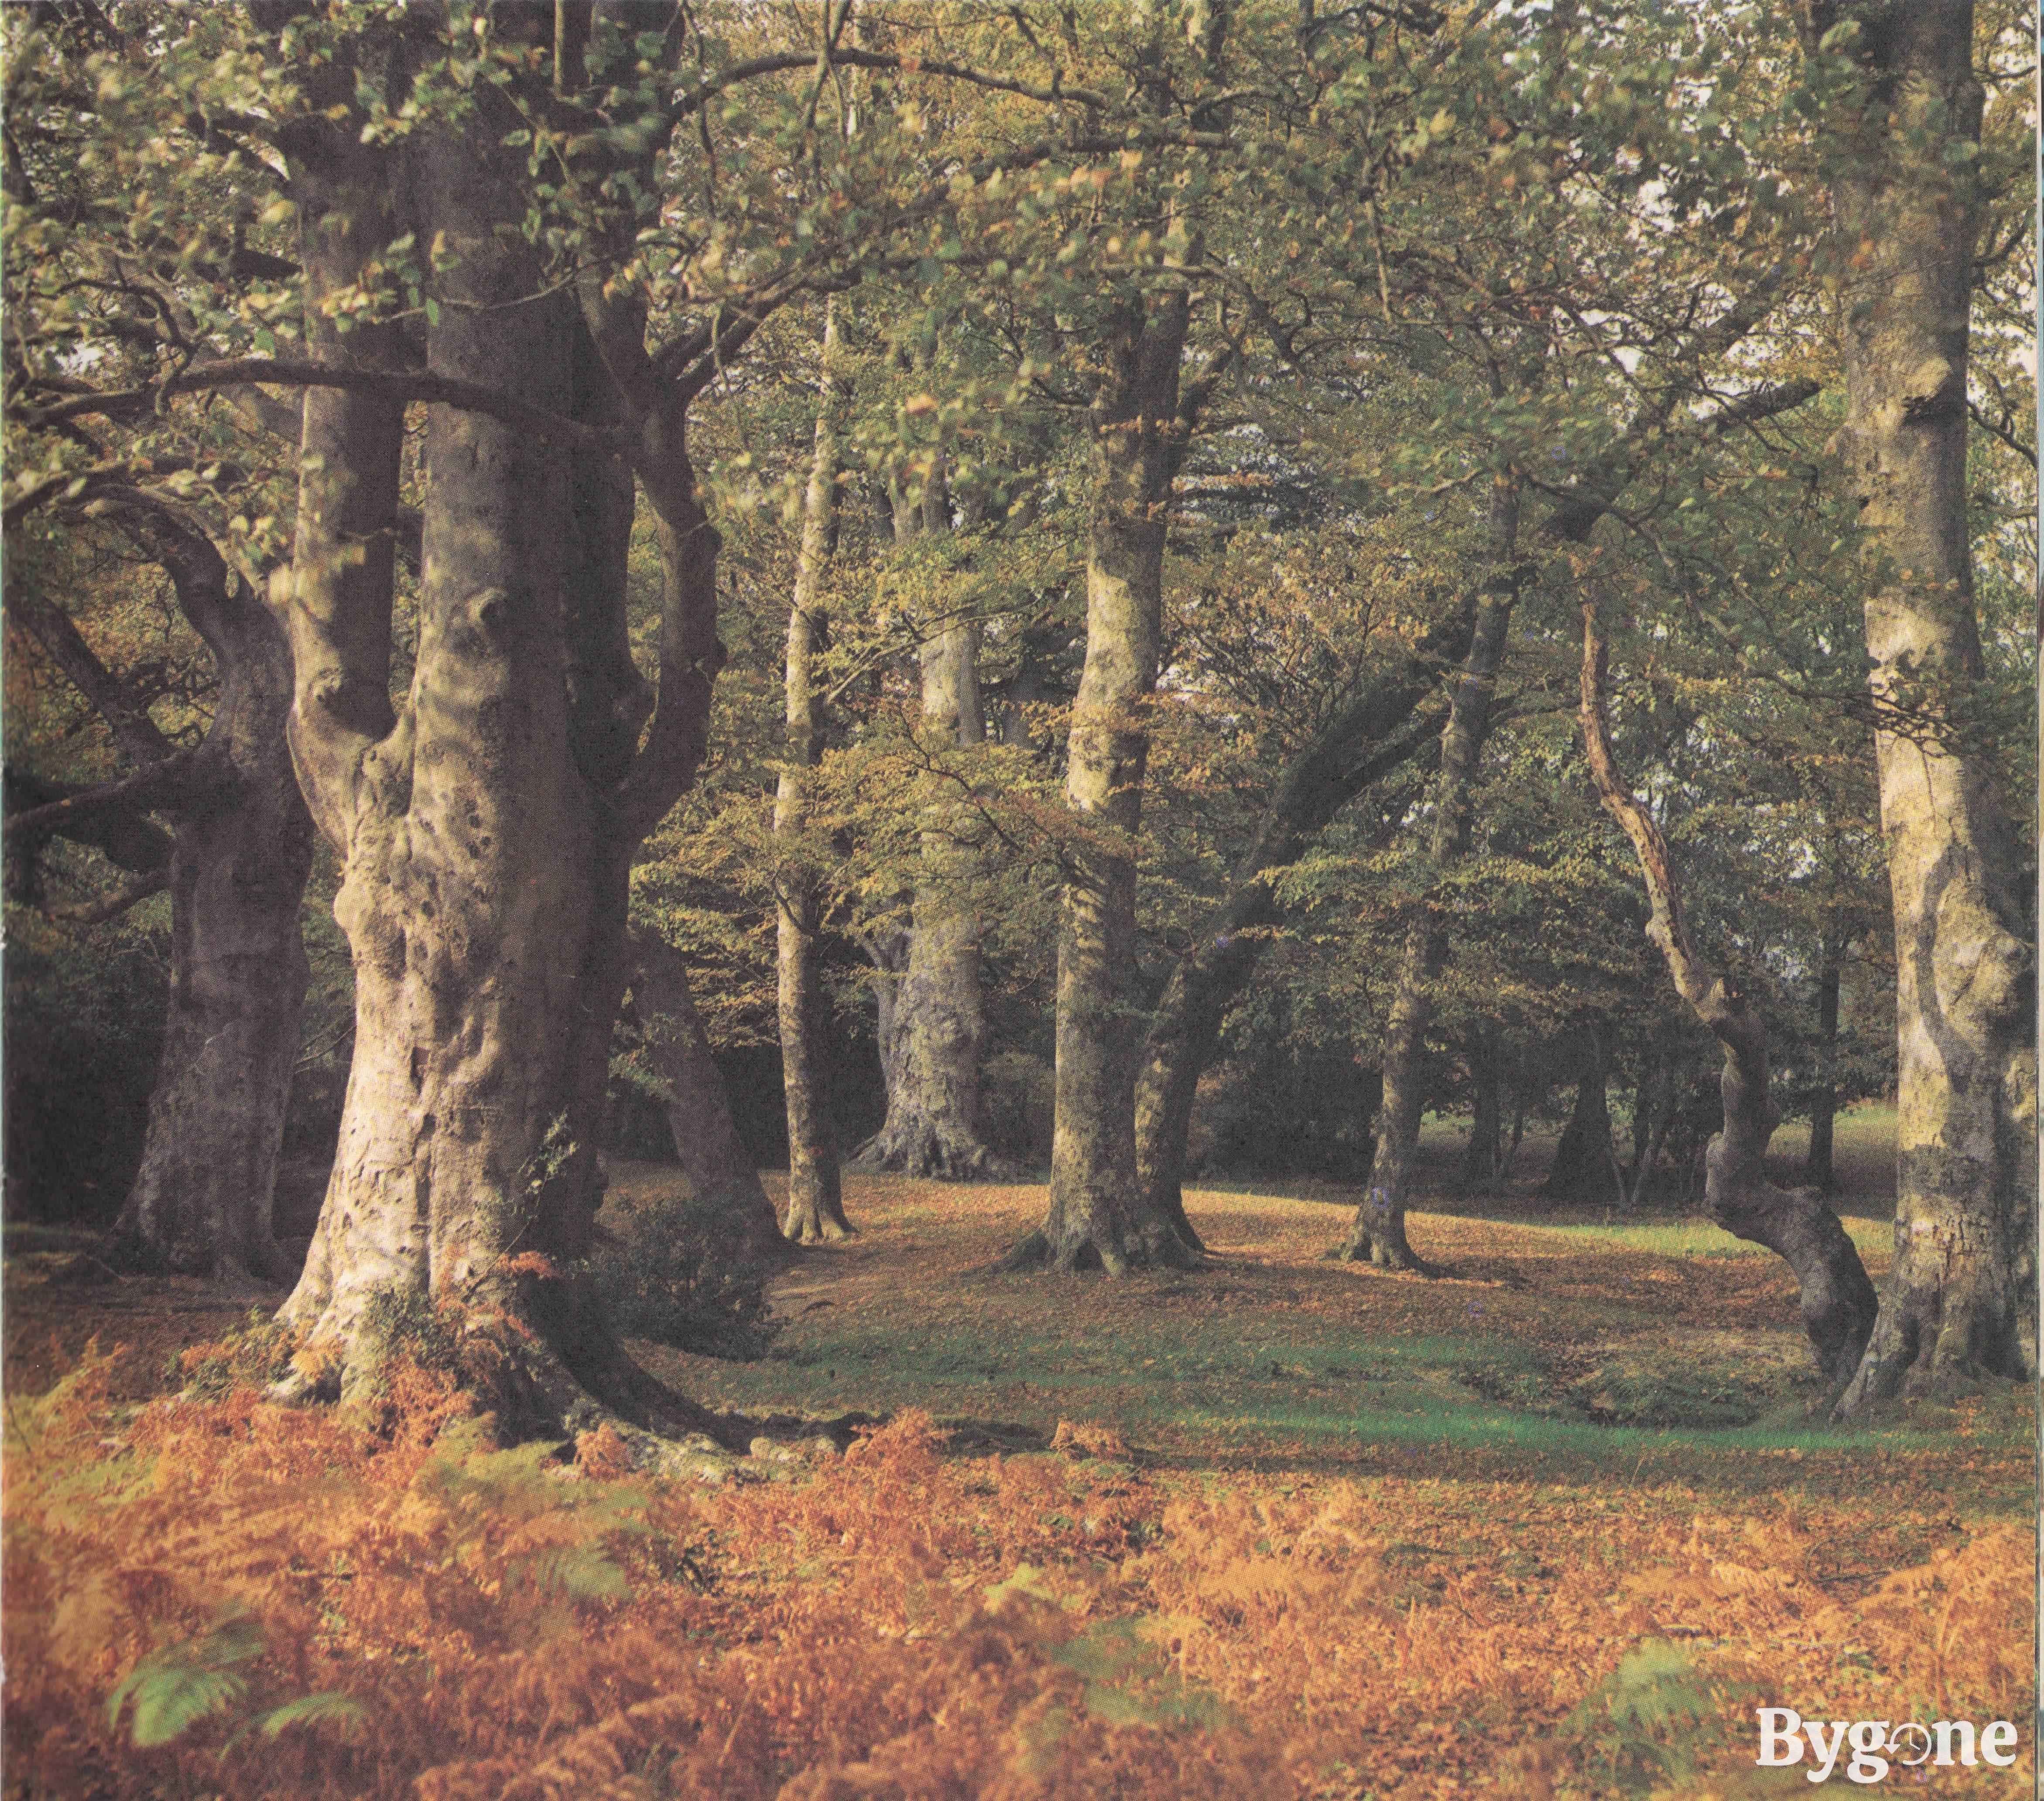 Autumn in the New Forest